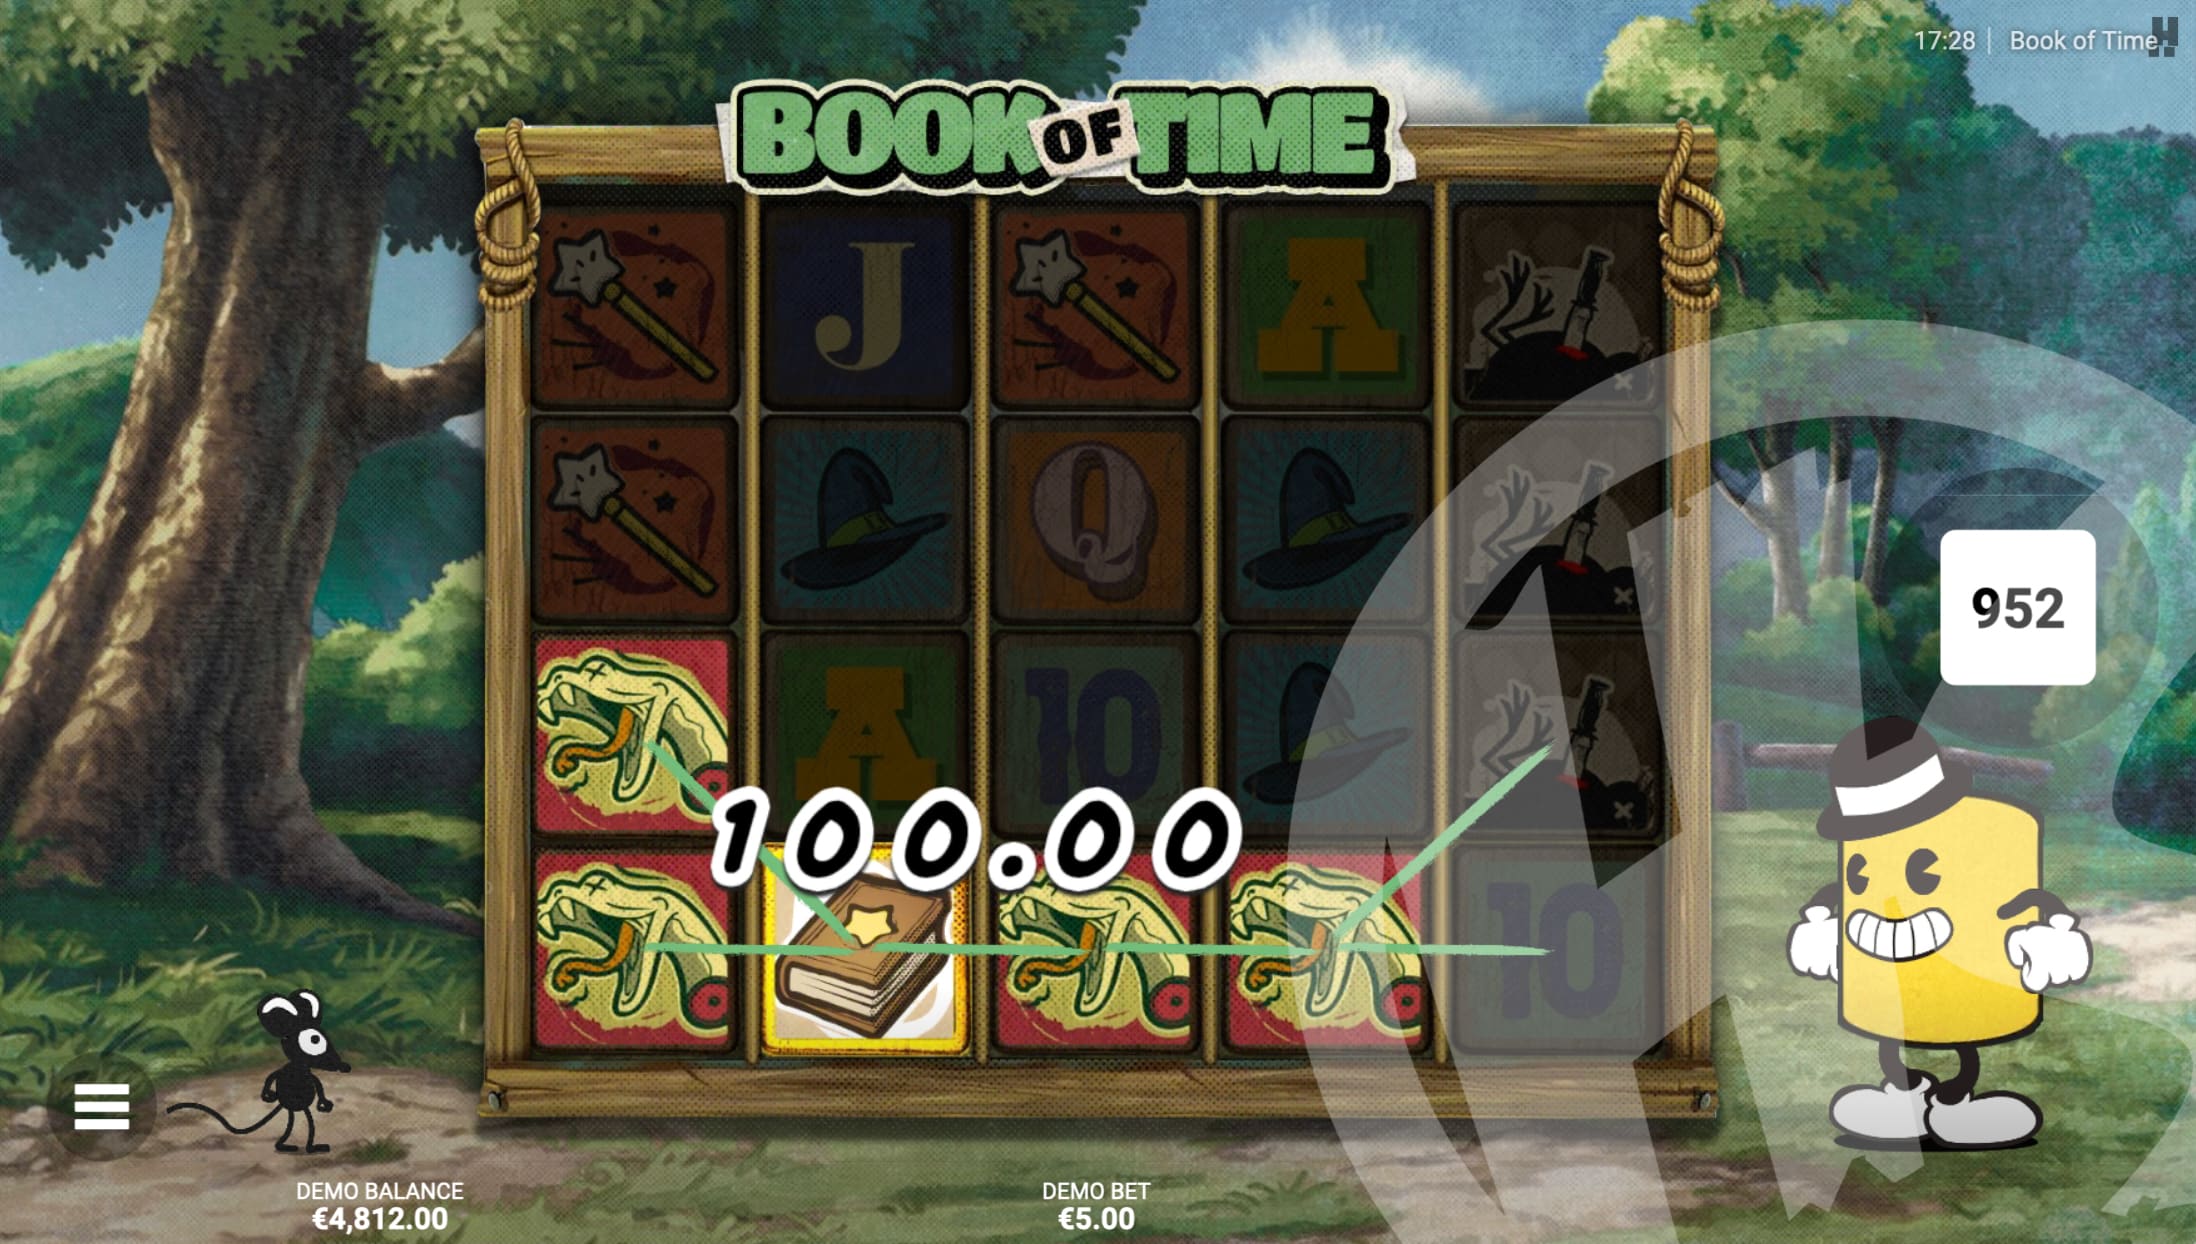 Book of Time Offers Players 20 Fixed Win Lines